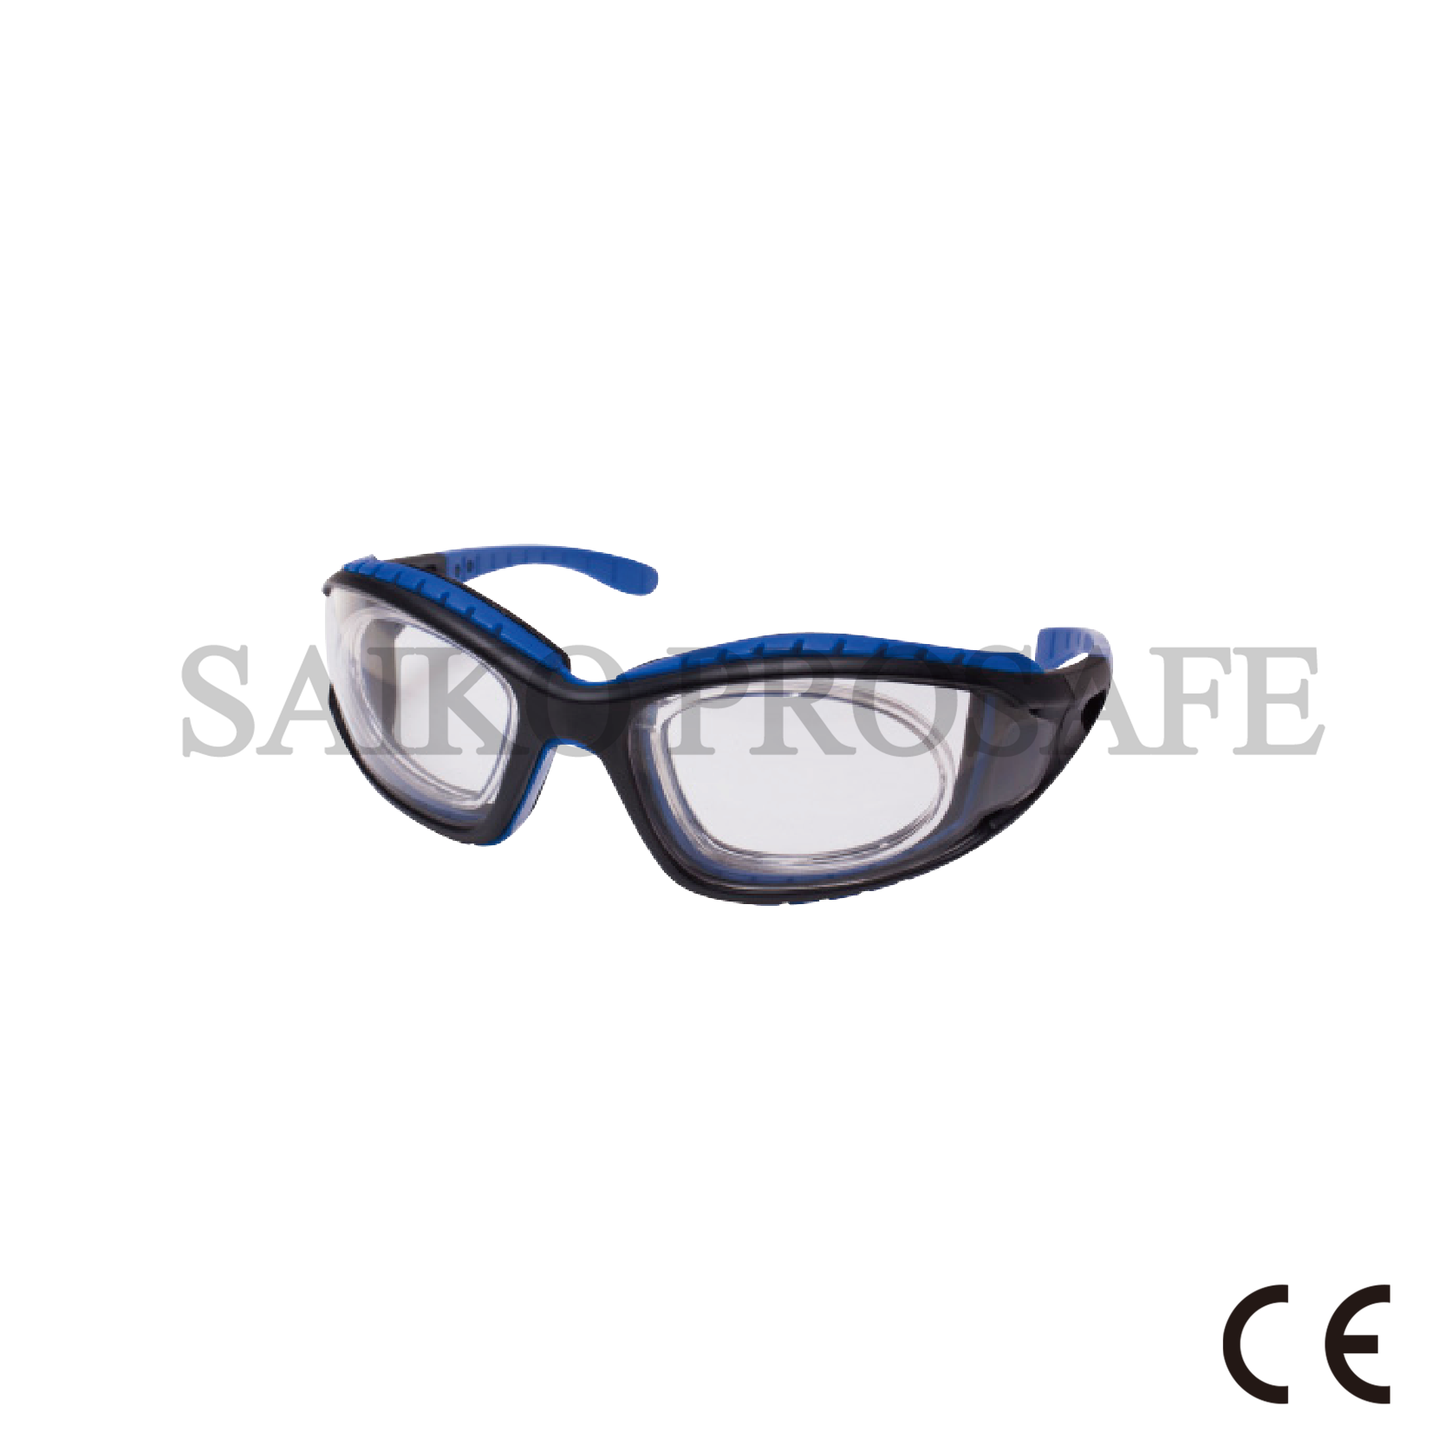 Safety spectacles SAFETY GLASSES KM1502061